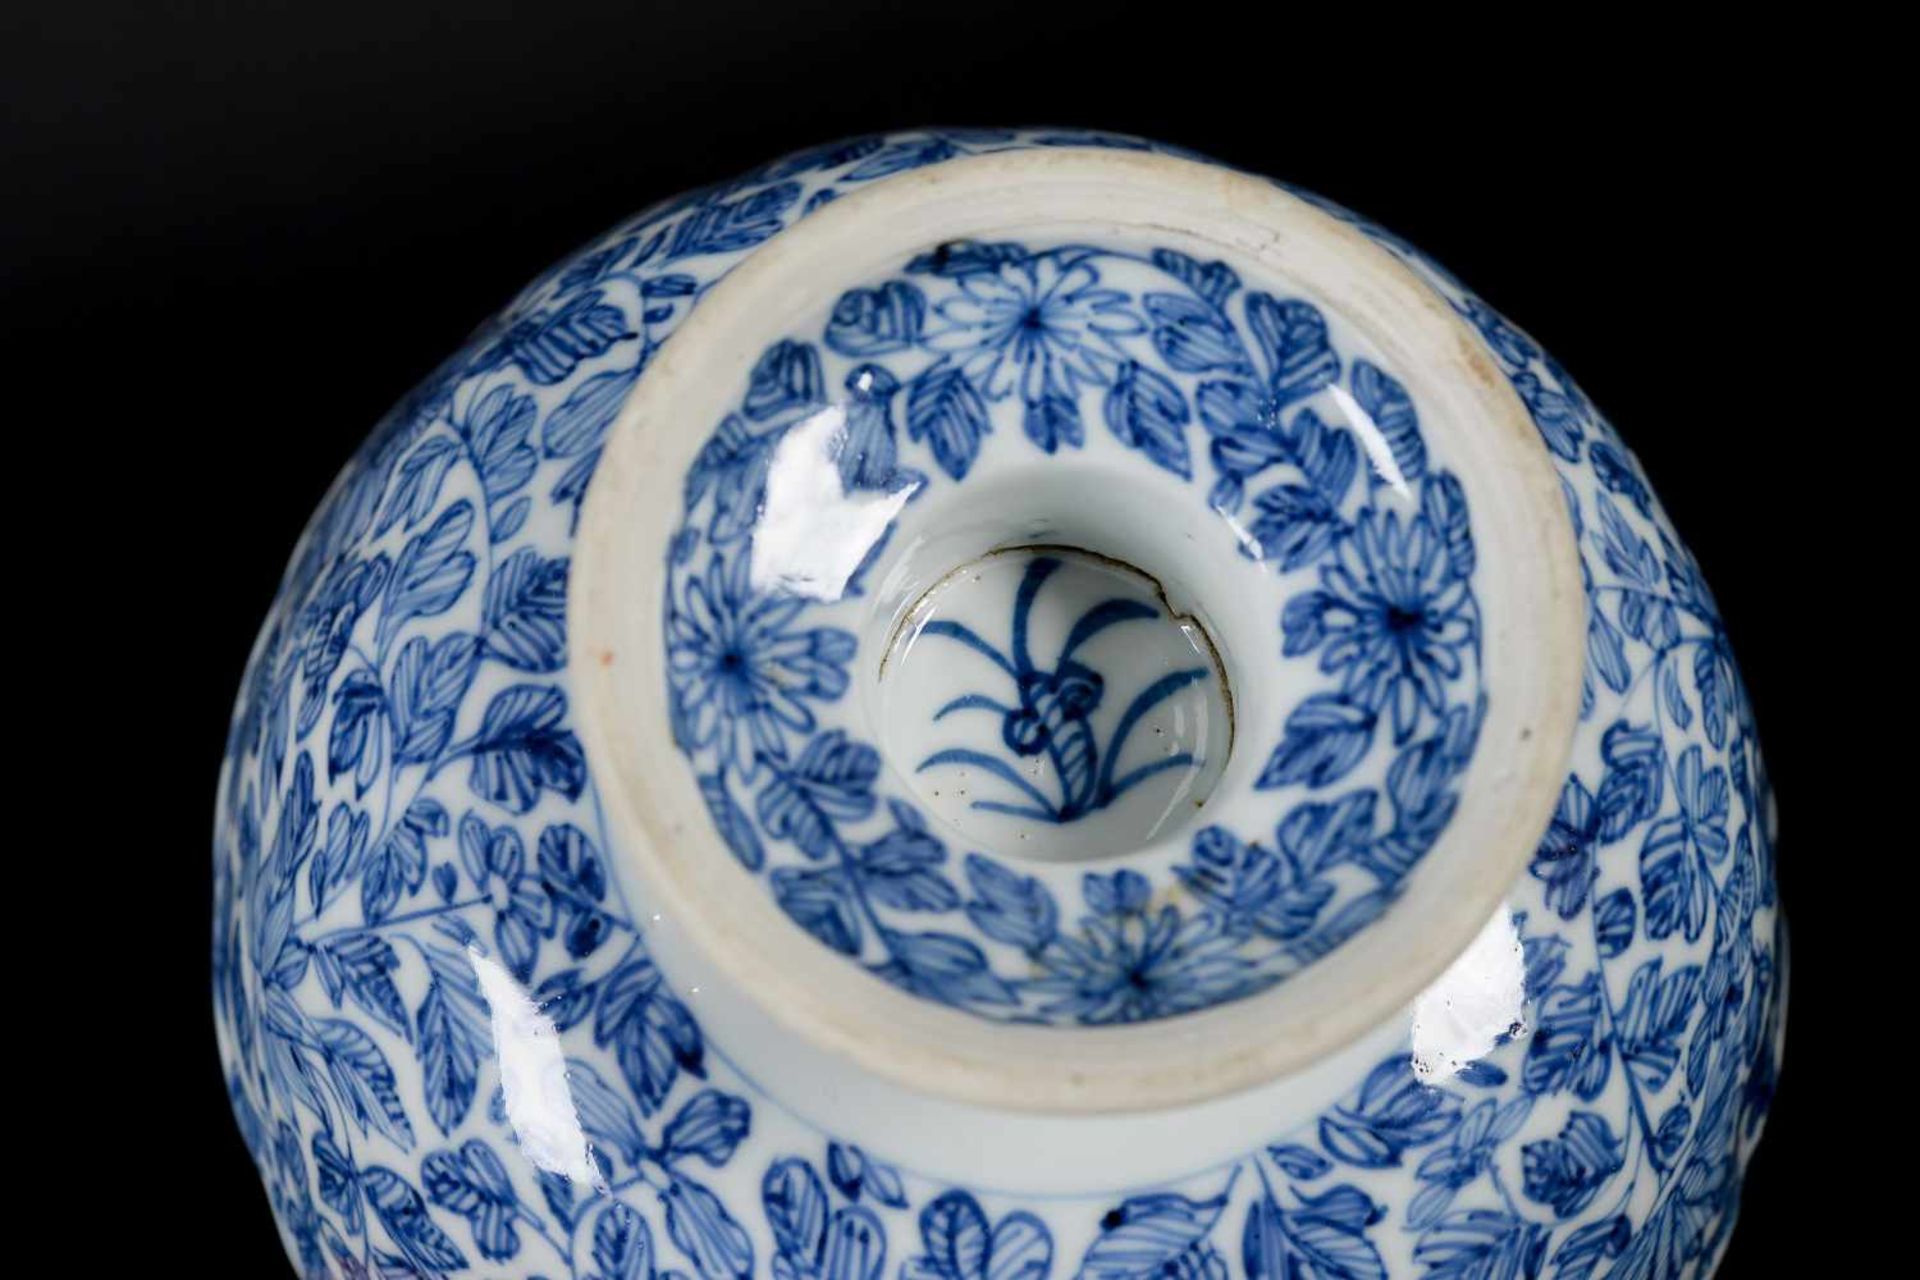 A pair of blue and white porcelain tazzas, decorated with flowers. Marked with symbol. China, - Image 11 of 14